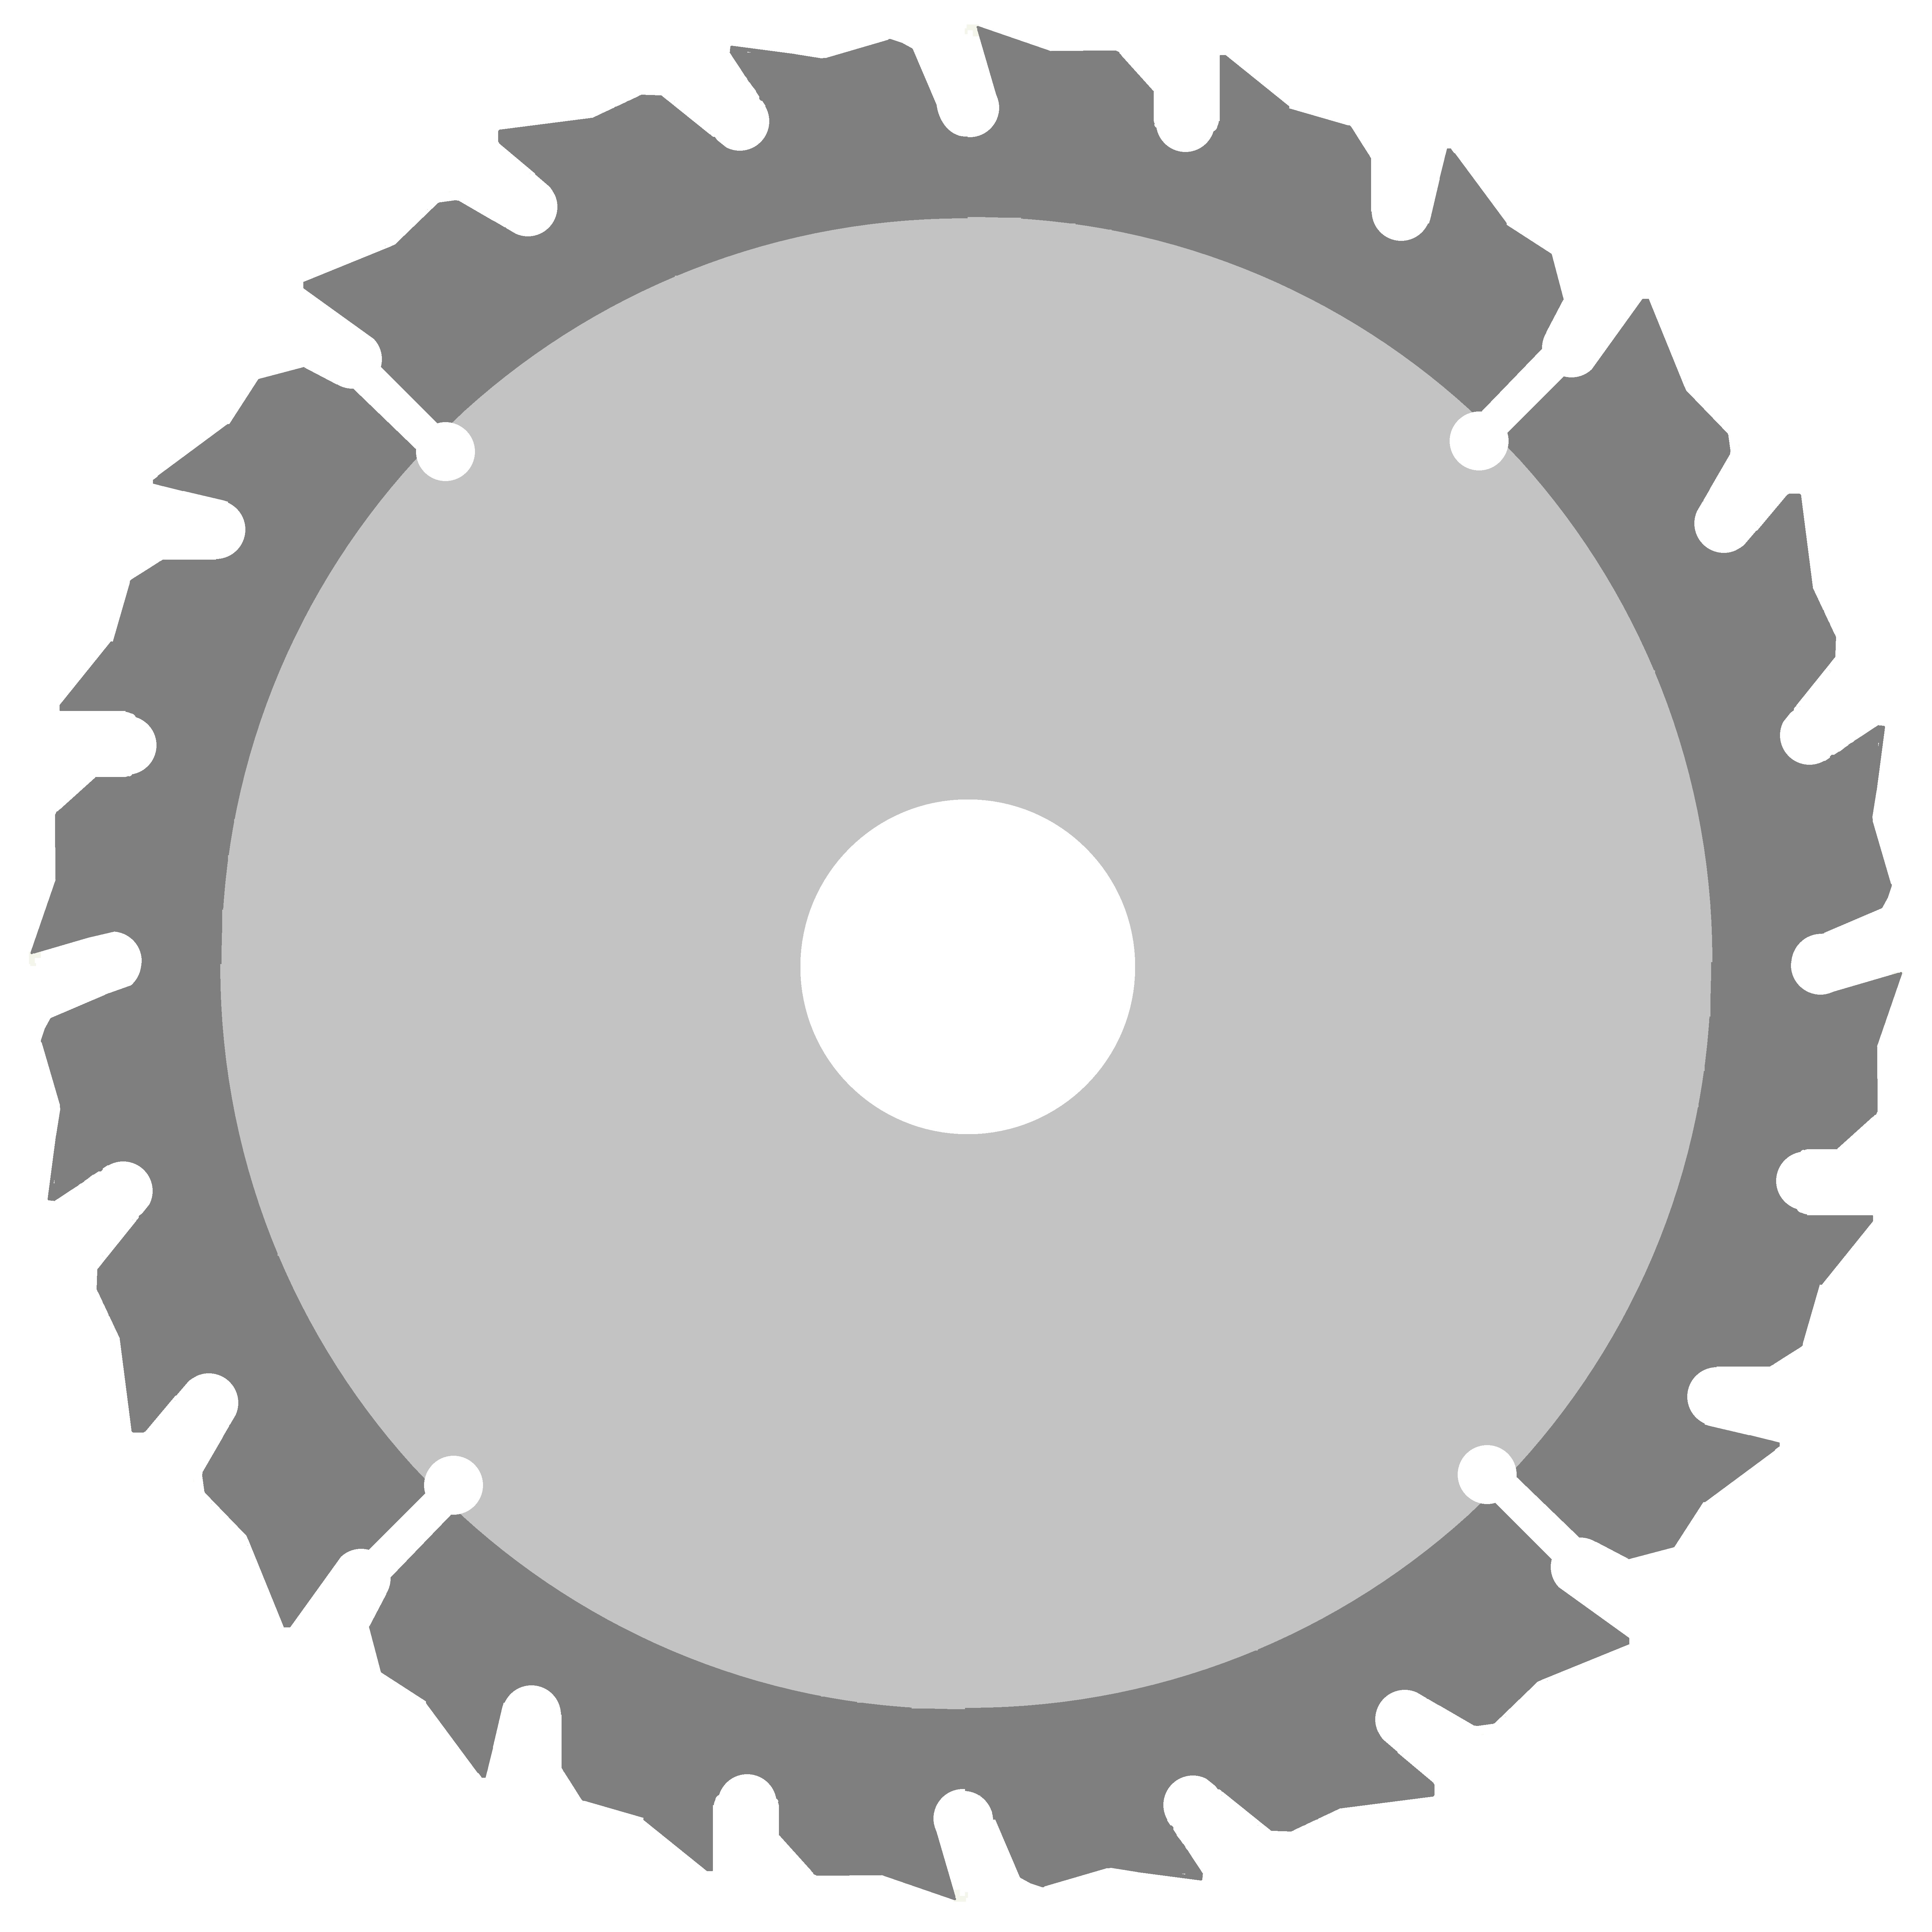 Saw Blade Cliparts